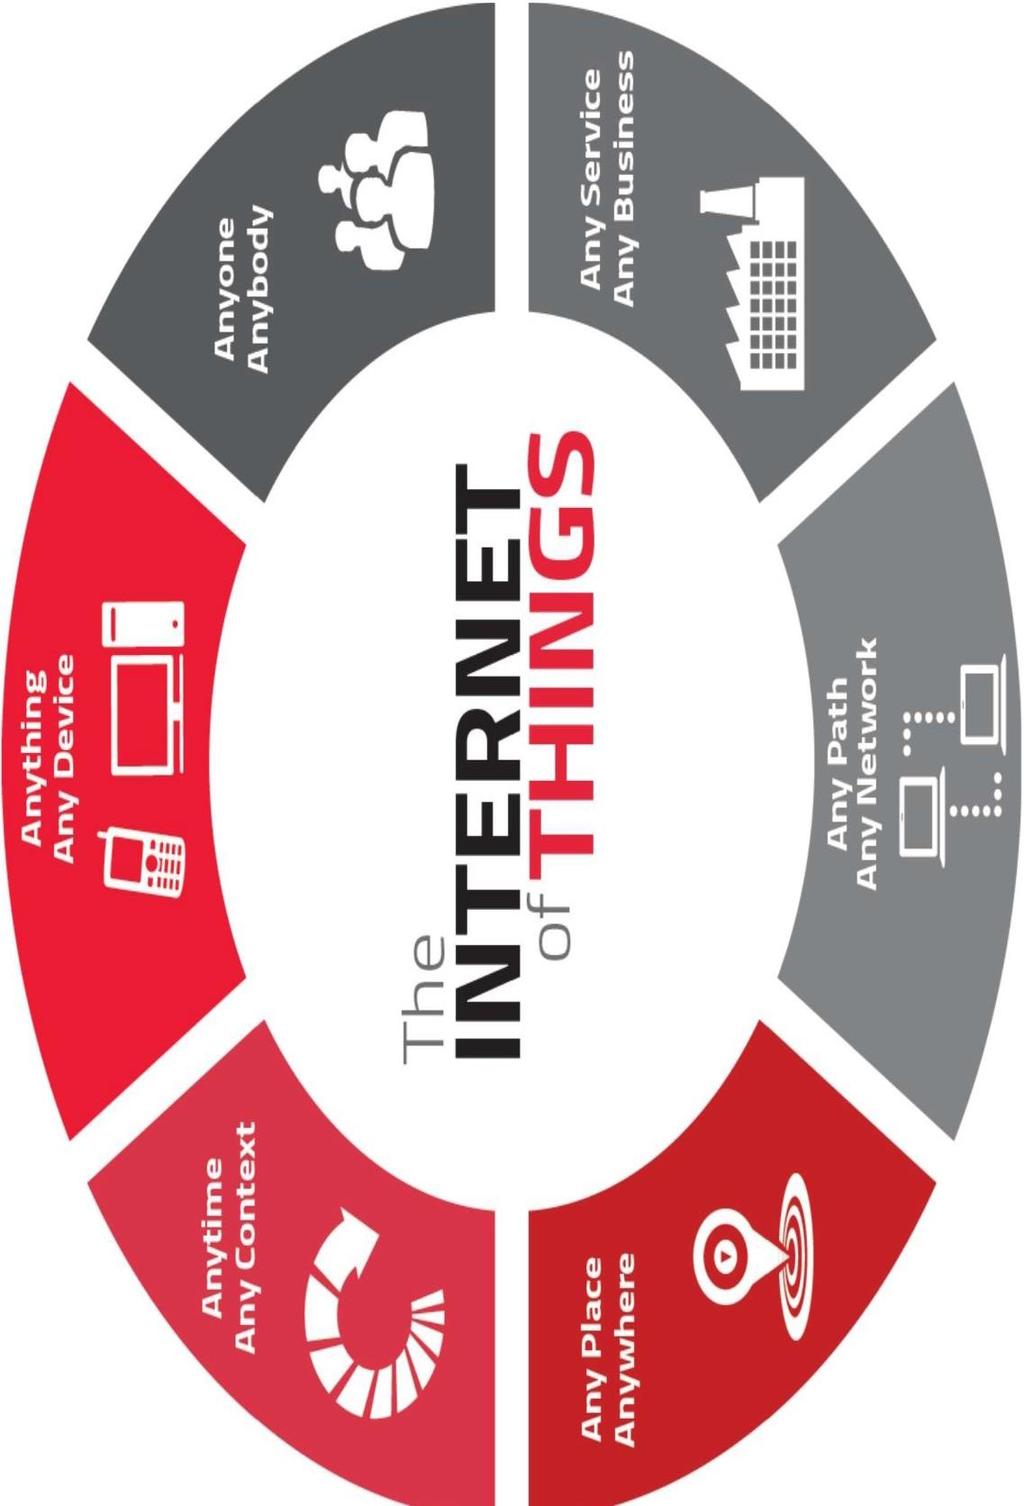 What is IoT A global infrastructure for the